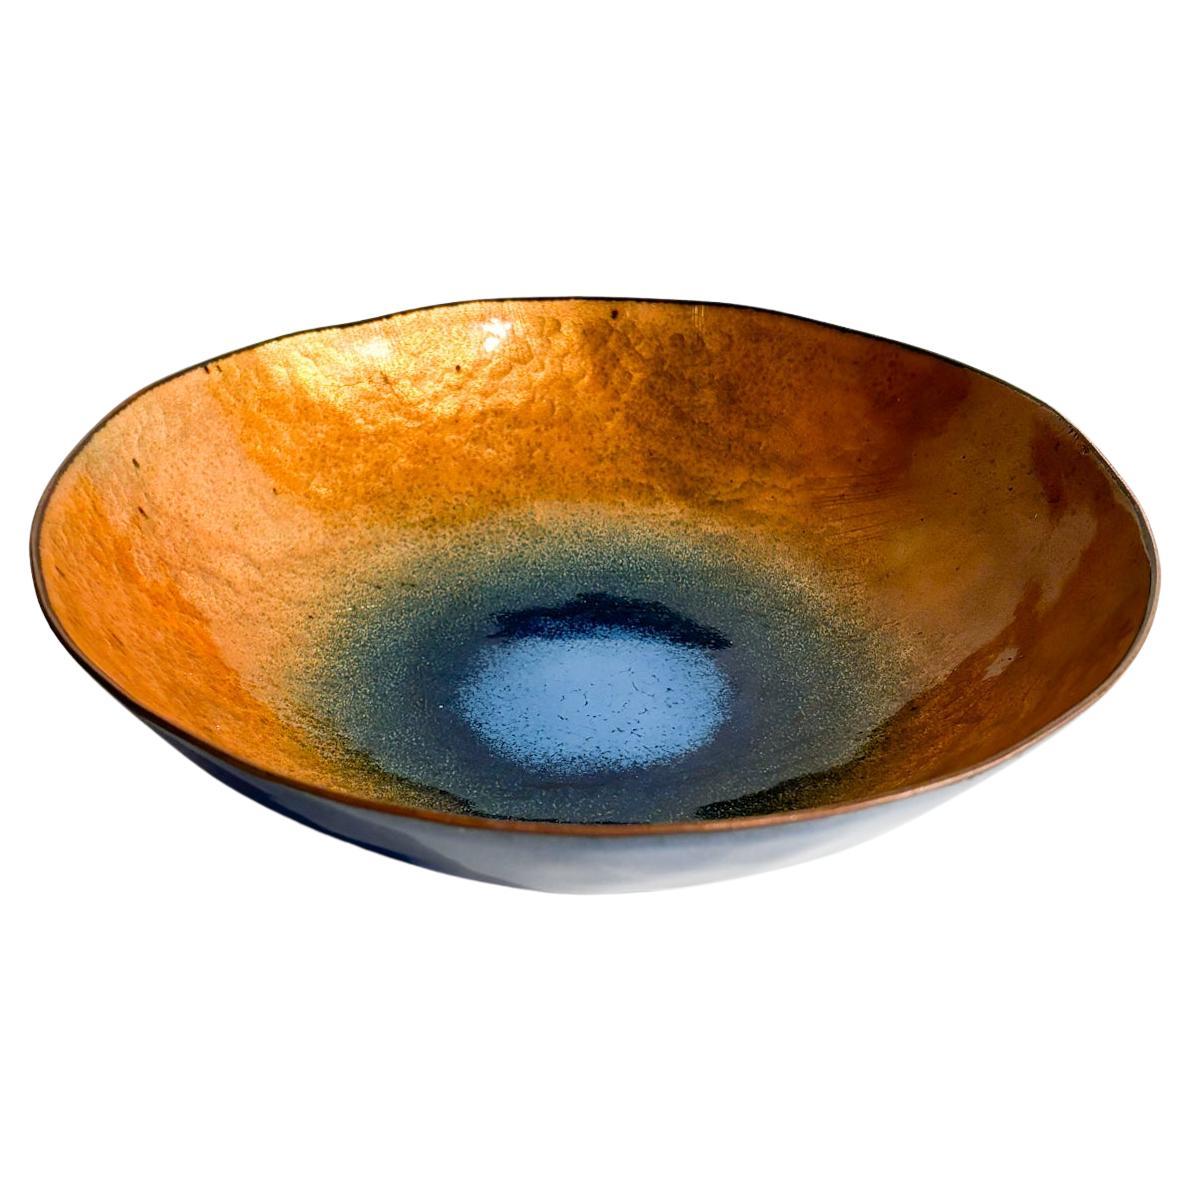 Enamelled Copper Bowl by Paolo De Poli from the 1950s For Sale